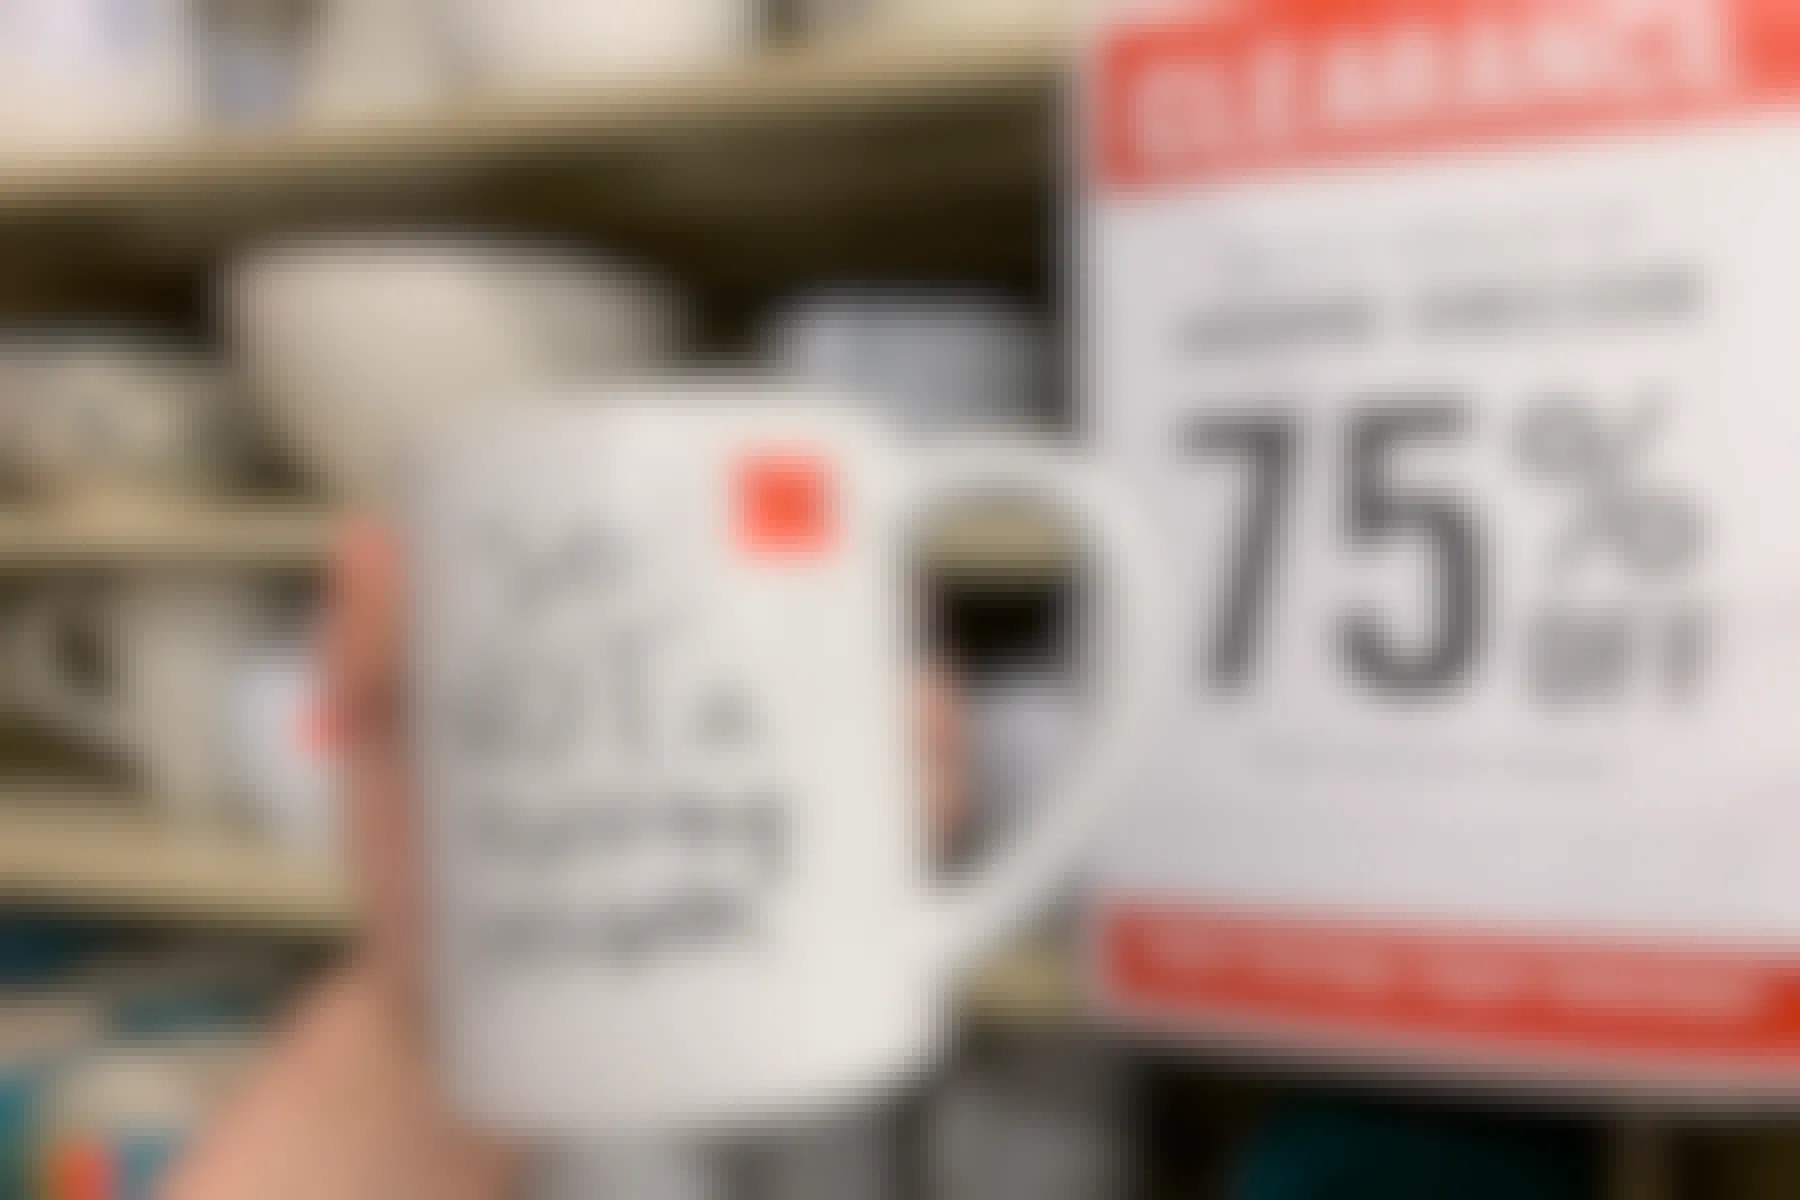 A mugA mug that says "so not a morning person" with a red clearance sticker stuck to it, held up next to a clearance sign that ready "home decor 75% off".